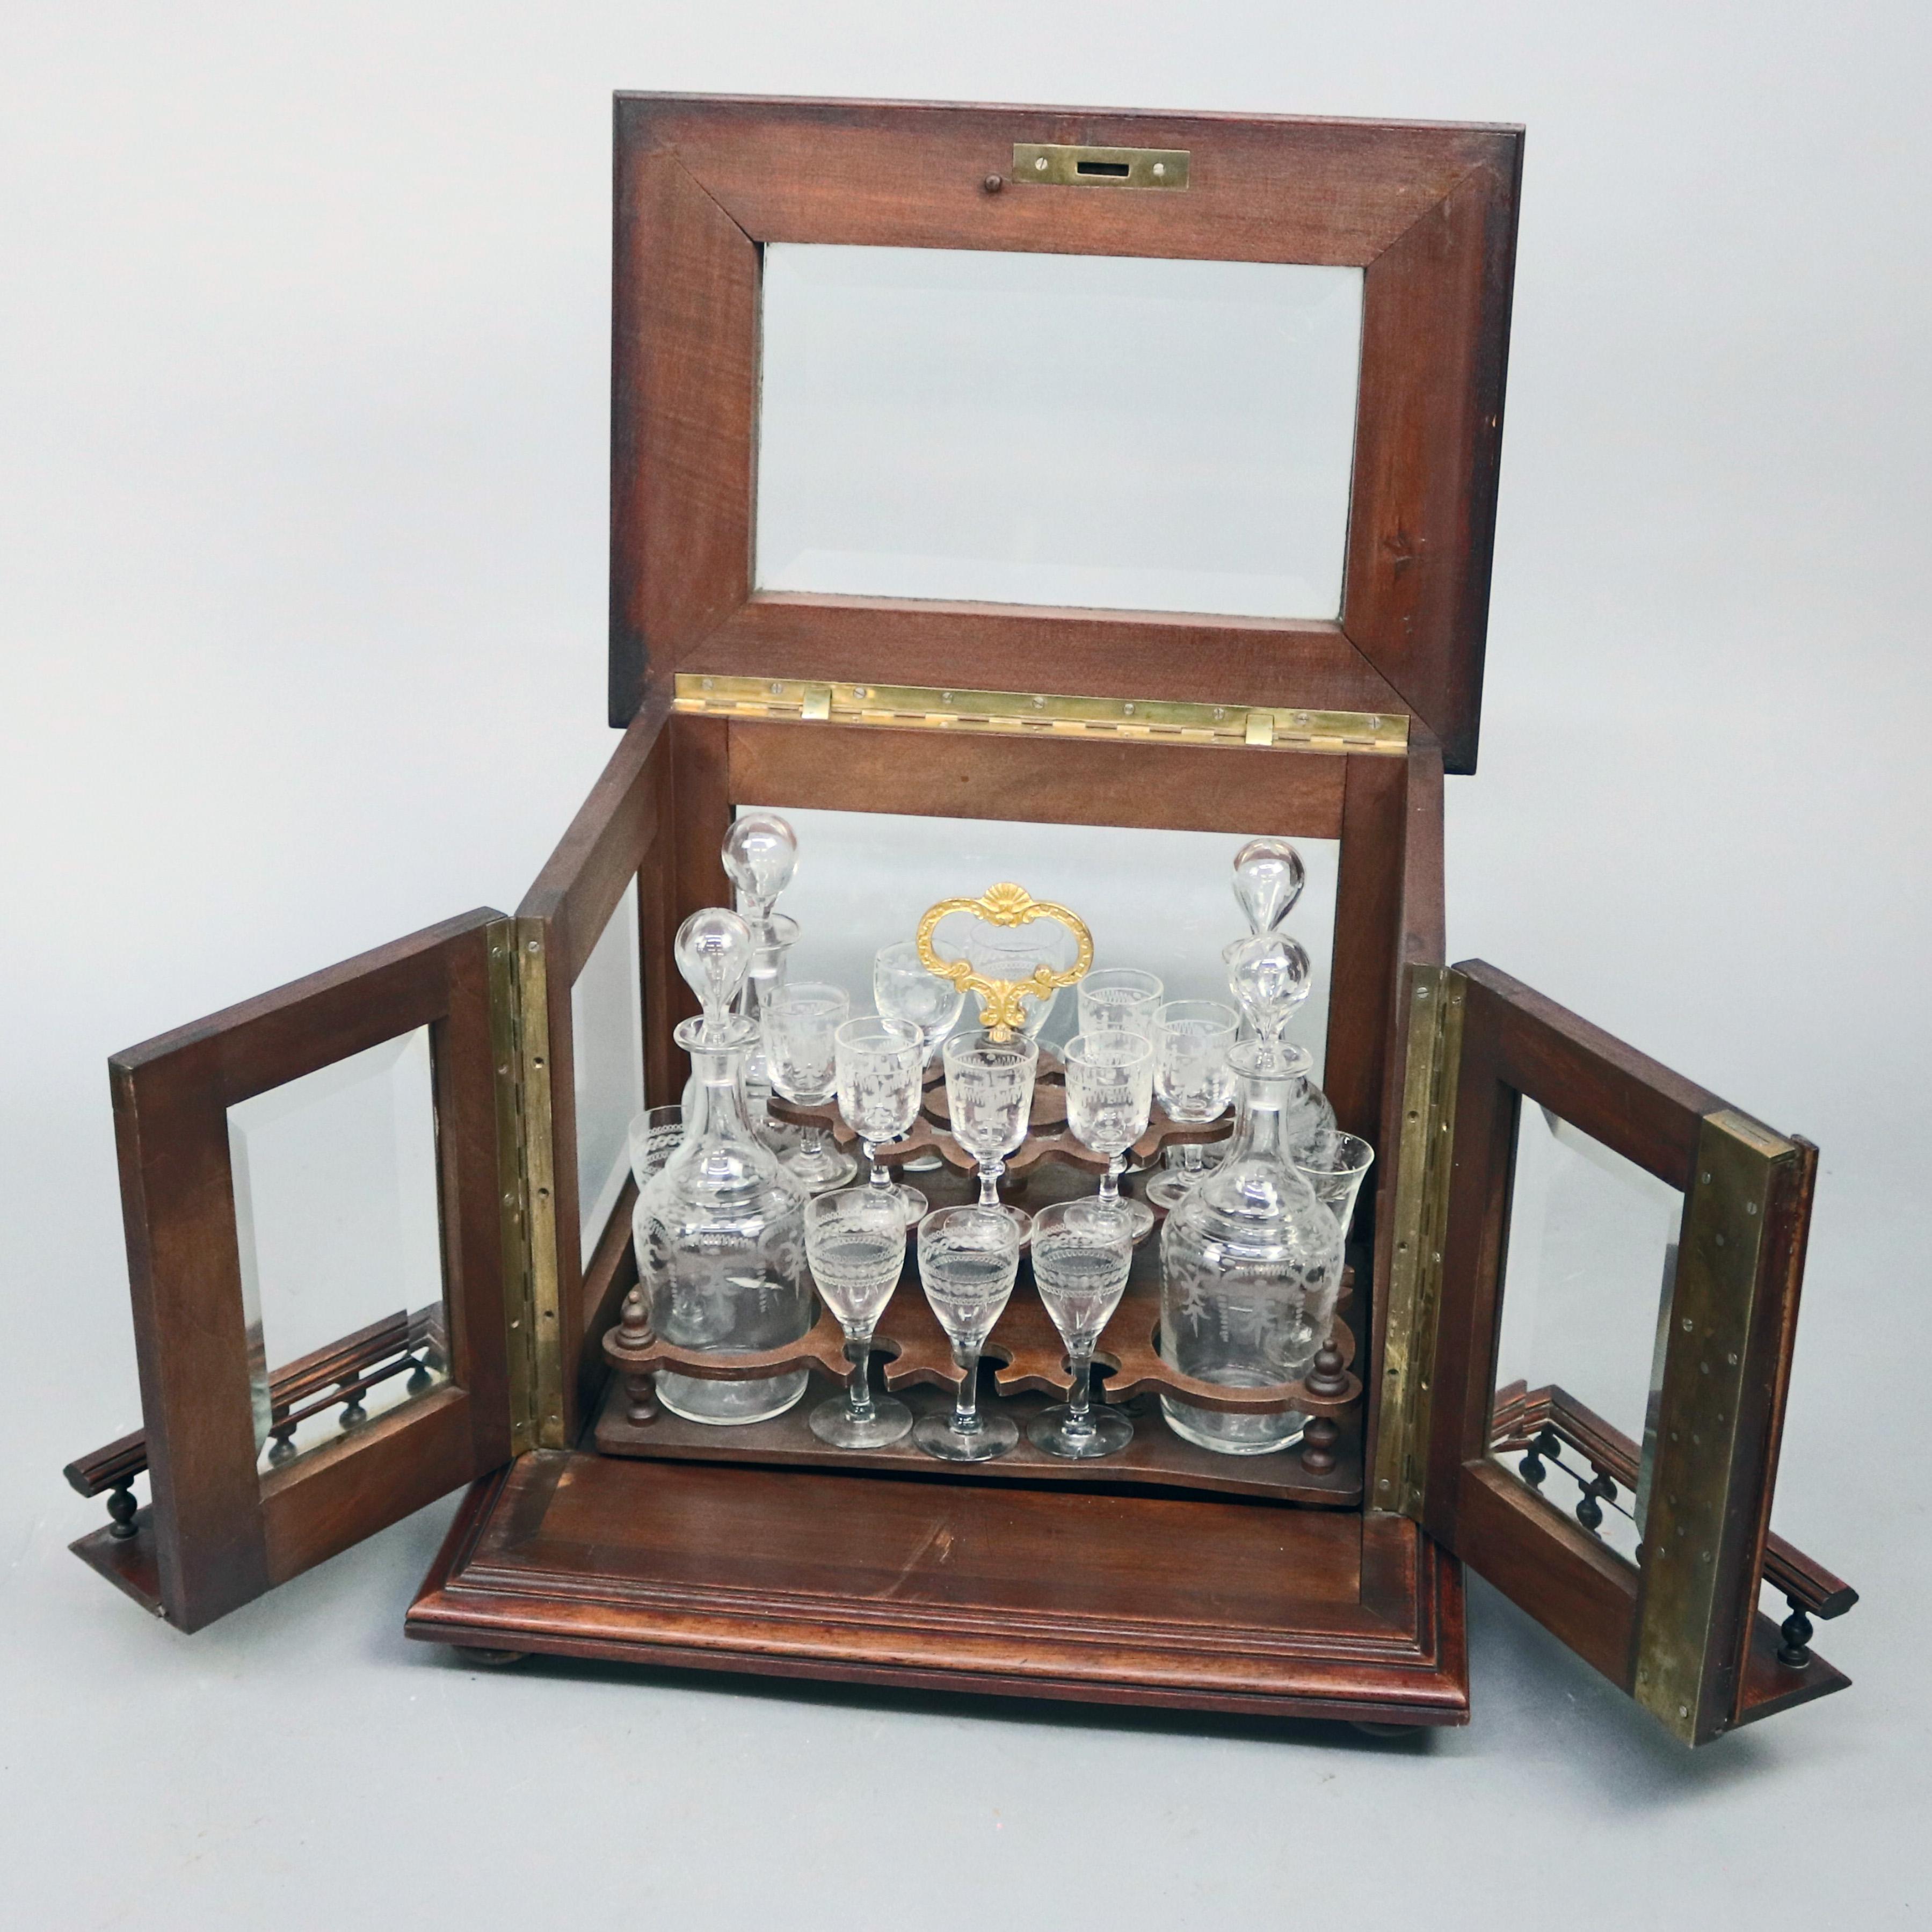 An antique continental Tantalus set offers glass case having mahogany frame and double doors opening to reveal mahogany tray with gilt handle and housing etched glass decanters and stemware, circa 1890

Measures: 12